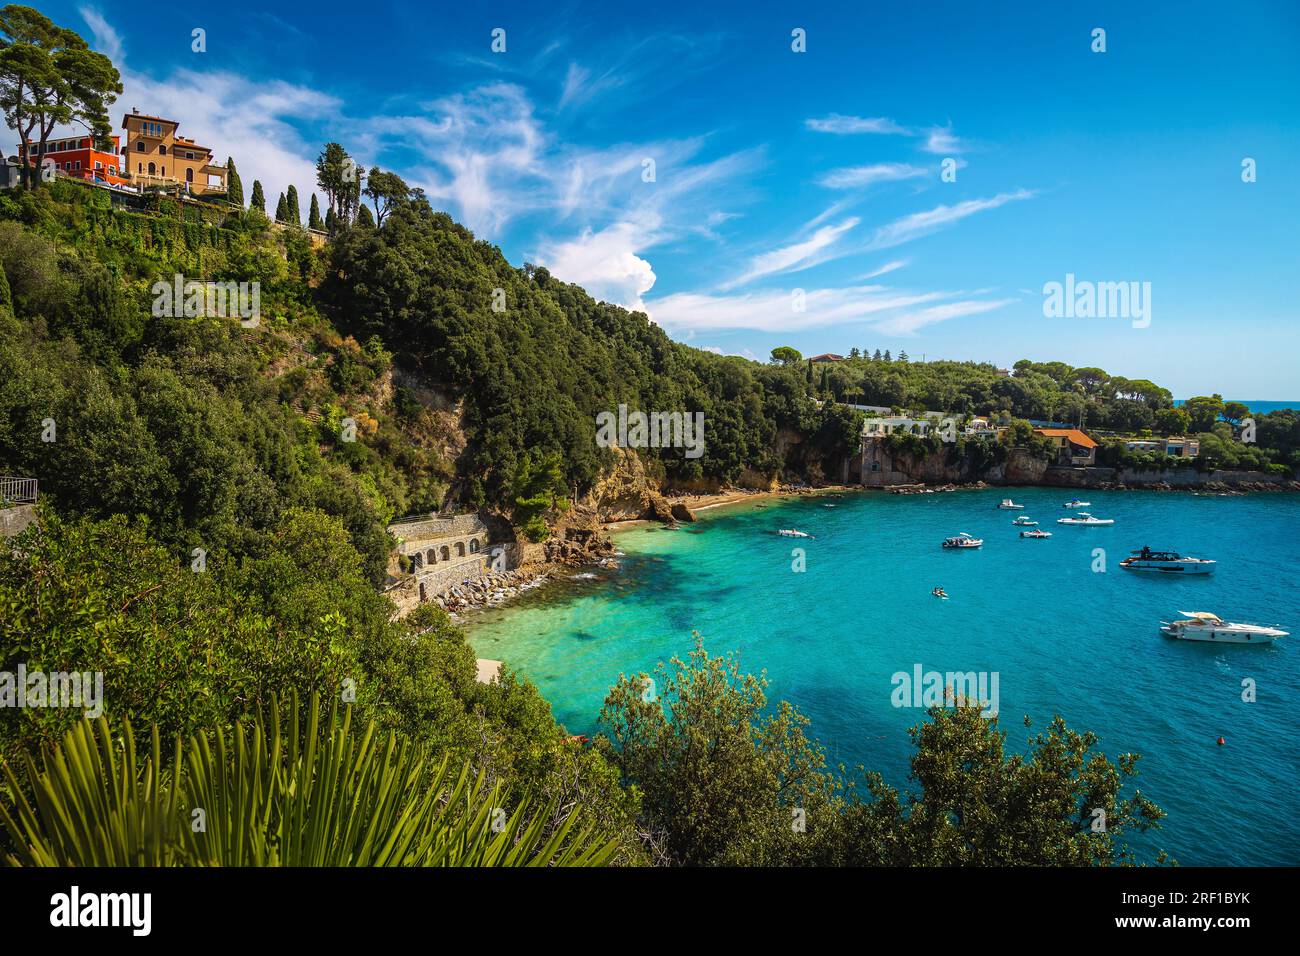 Anchored boats and yachts in the beautiful bay near Lerici, Liguria, Italy, Europe Stock Photo